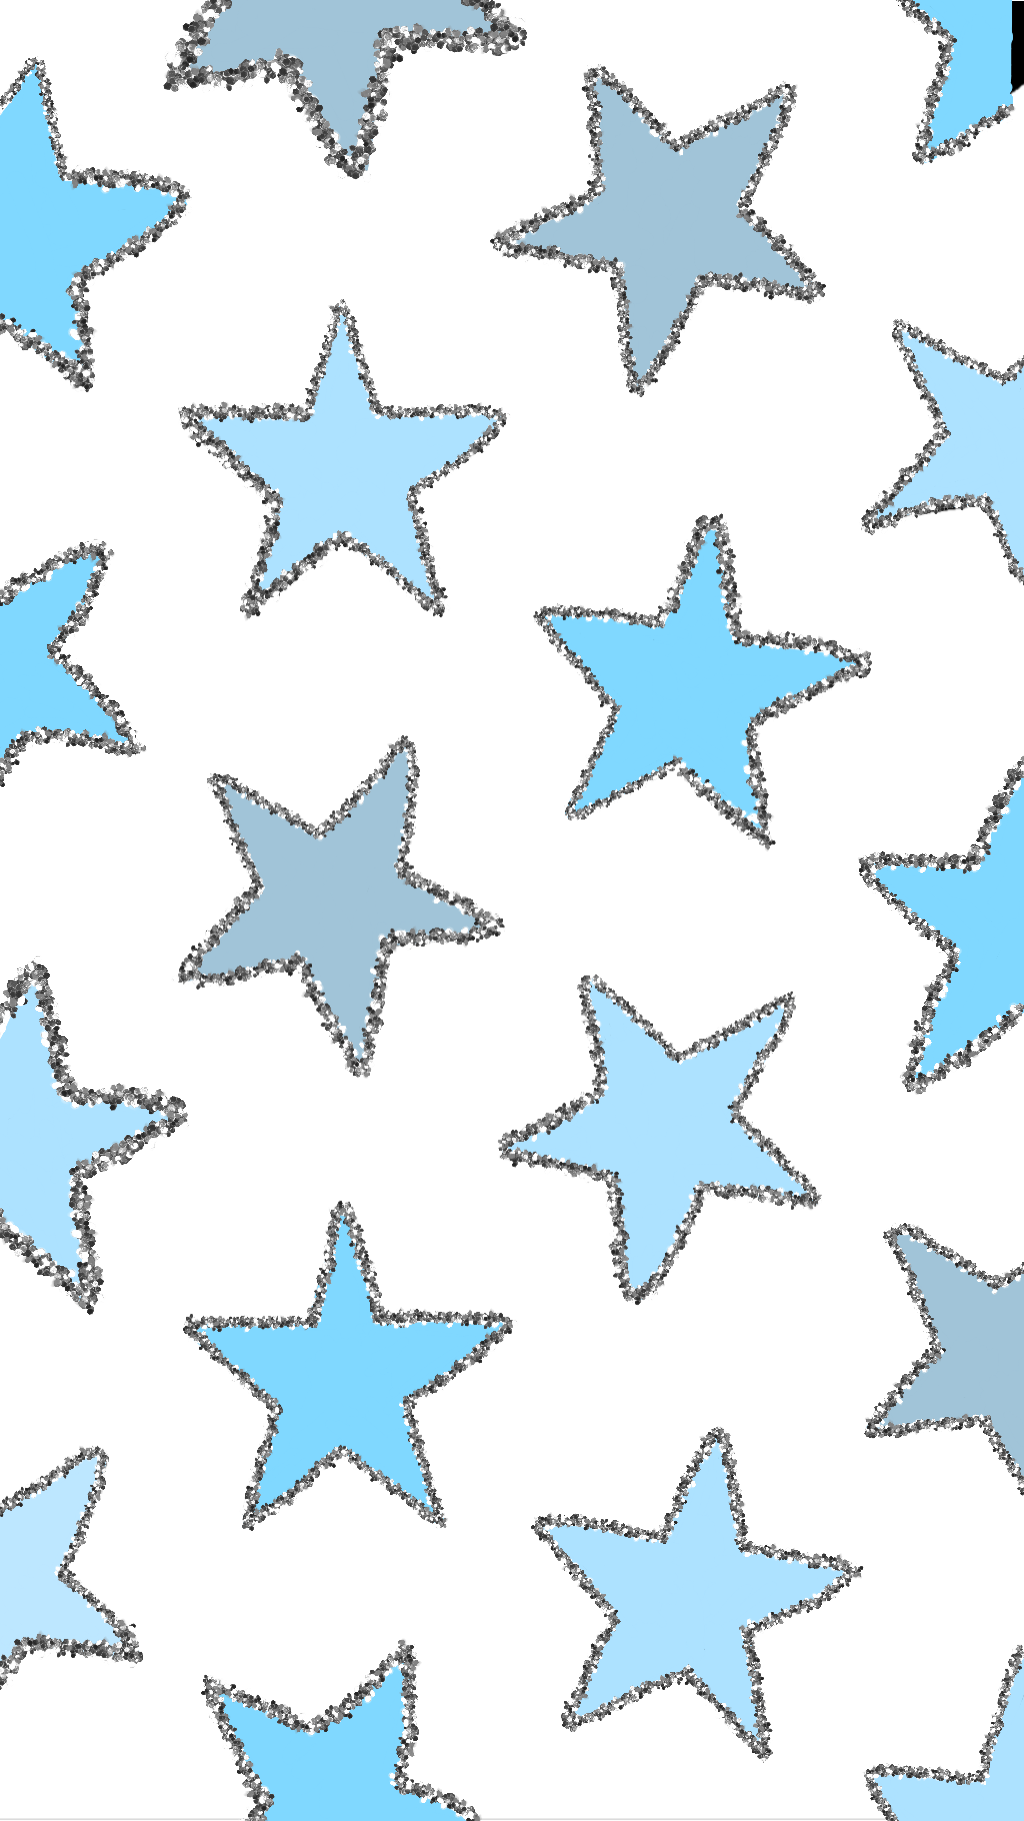 blue star wallpaper. Preppy wallpaper, Picture collage wall, Cute patterns wallpaper